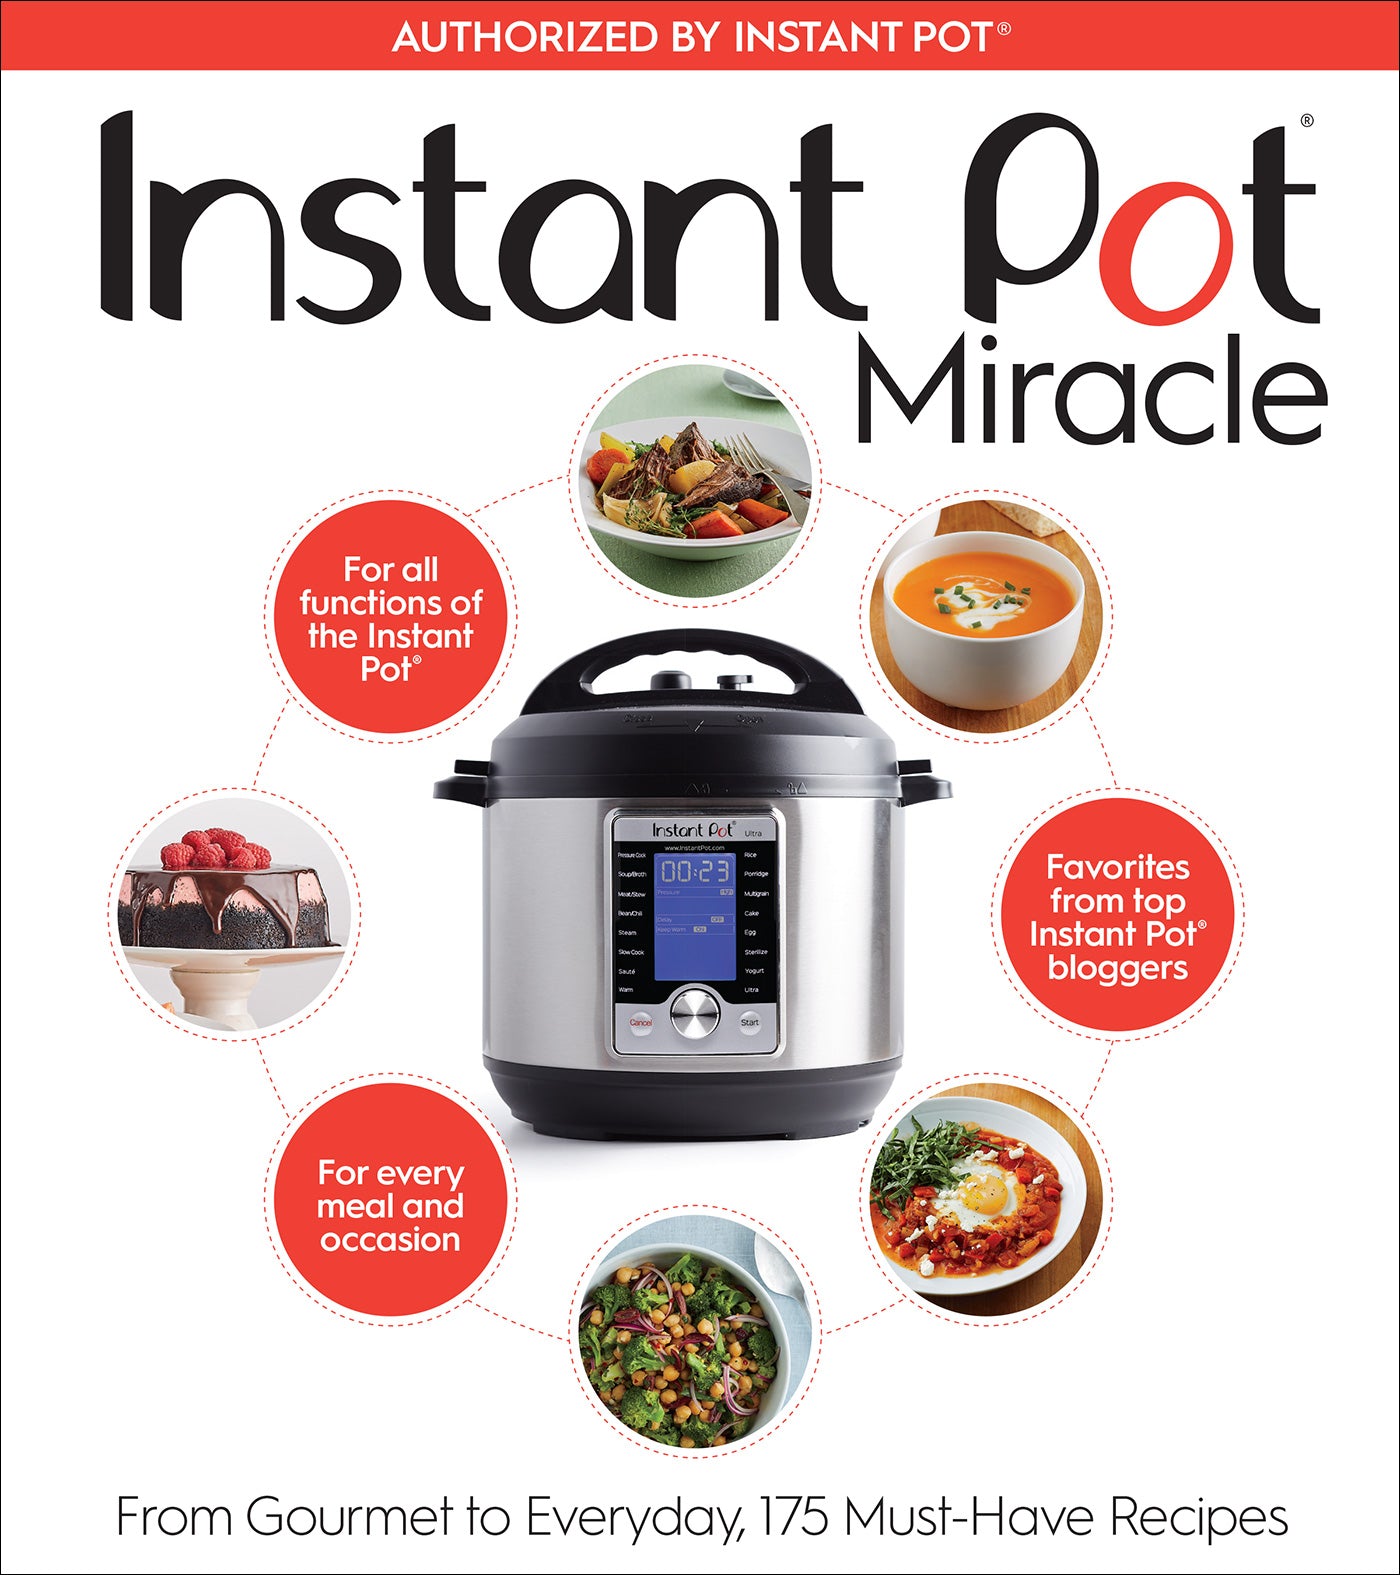 front cover of book with a instant pot, pictures of dishes, and title